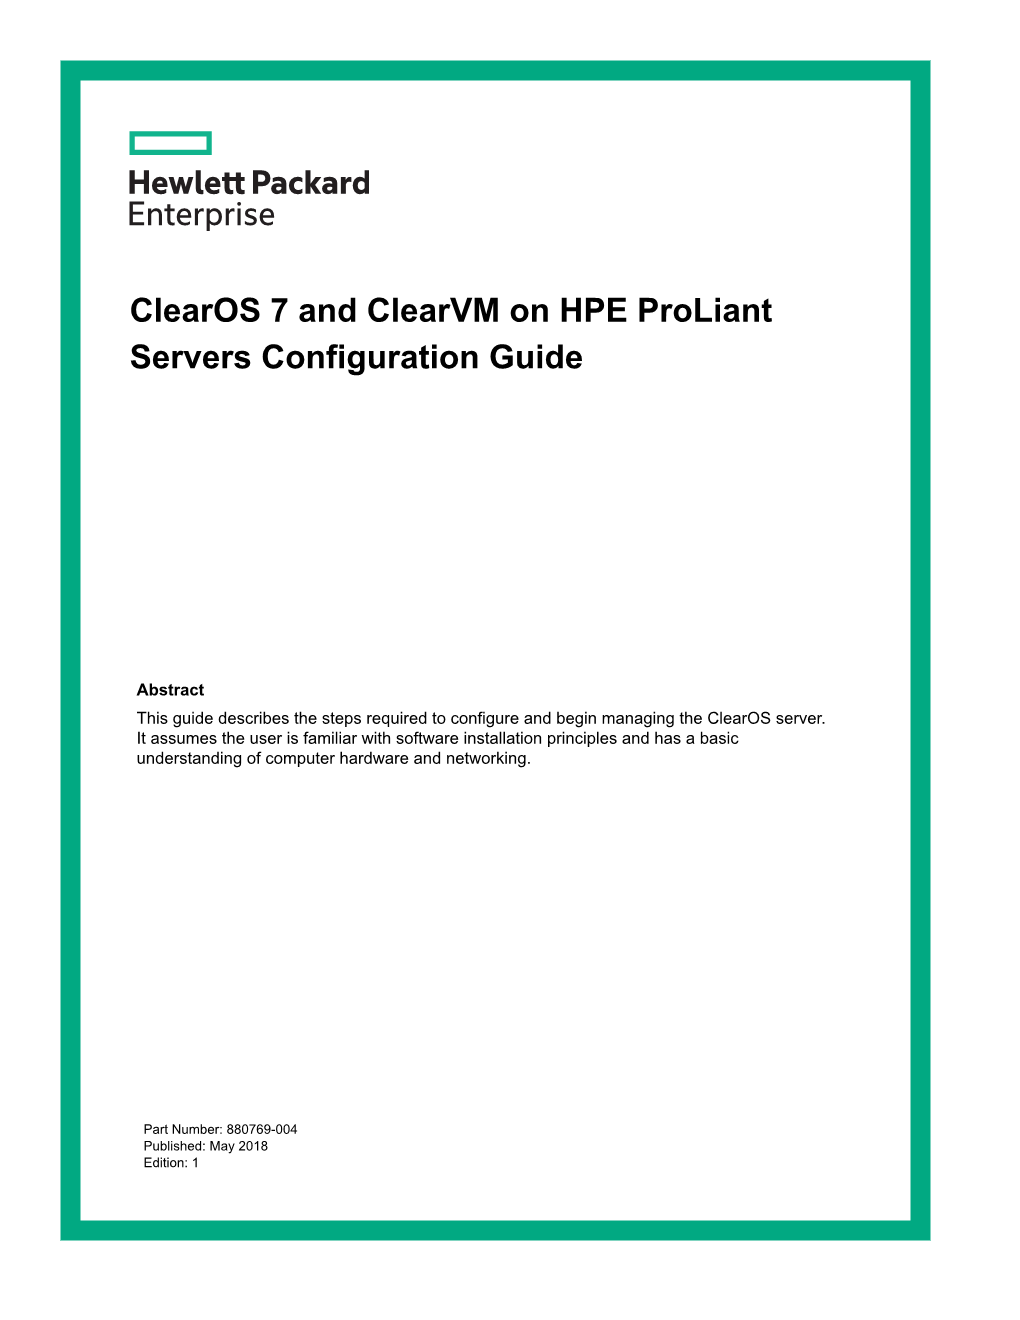 Clearos 7 and Clearvm on HPE Proliant Servers Configuration Guide